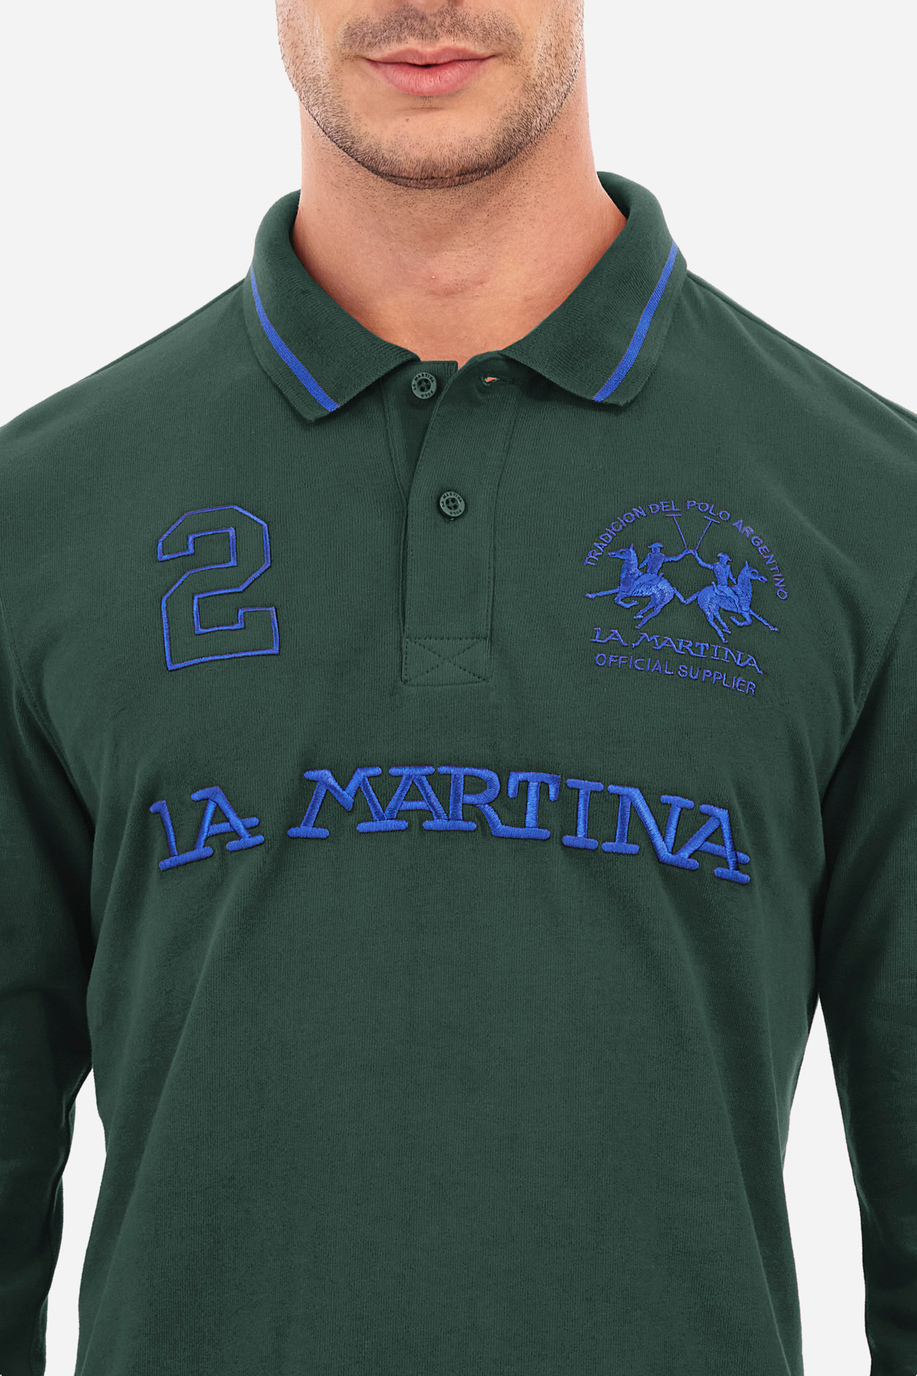 Man polo shirt in regular fit - Urbe - XLarge sizes | La Martina - Official Online Shop